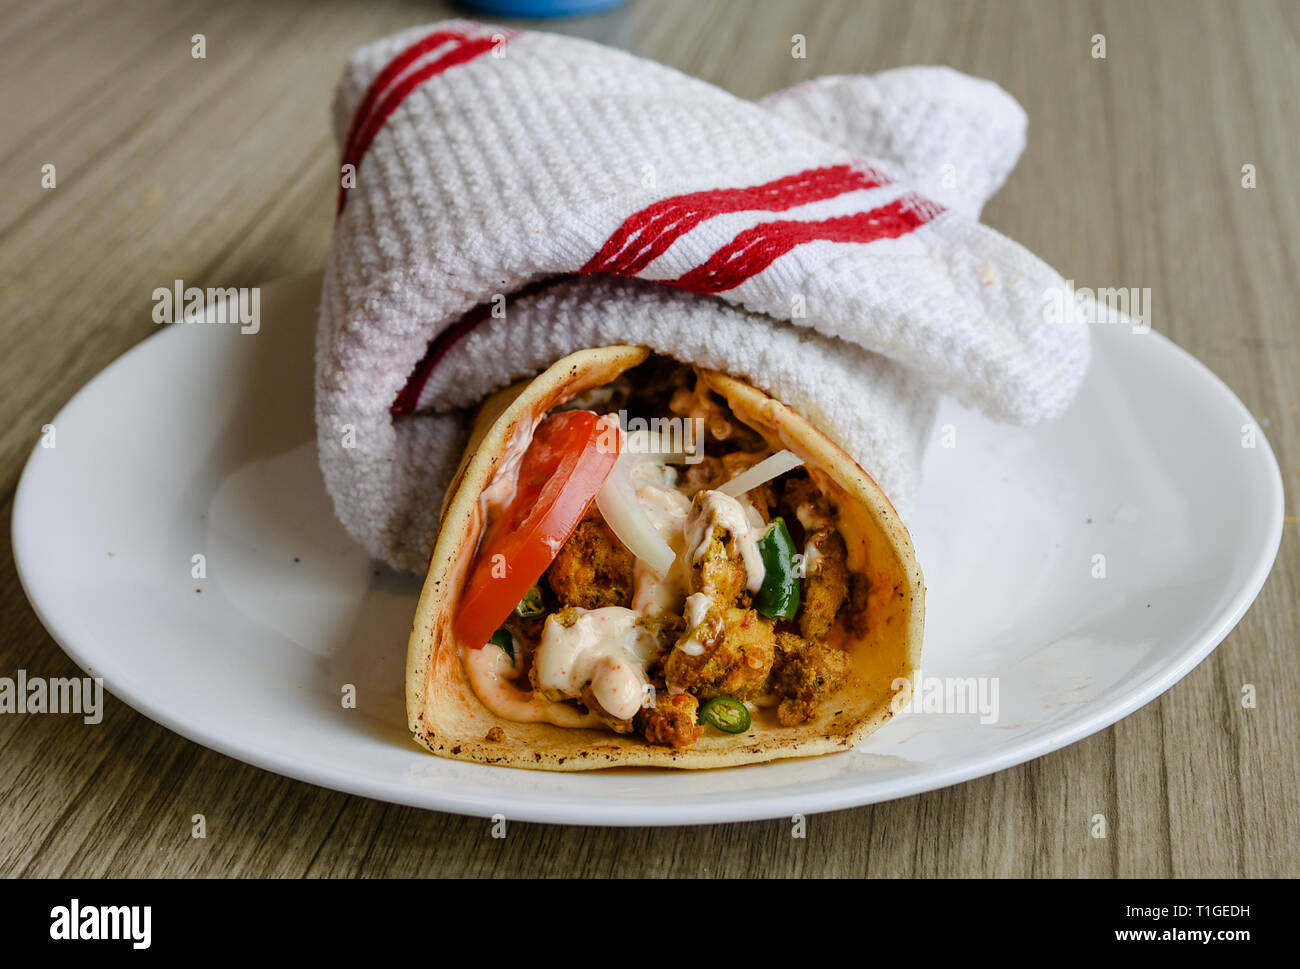 cloth wrapped sandwich Stock Photo